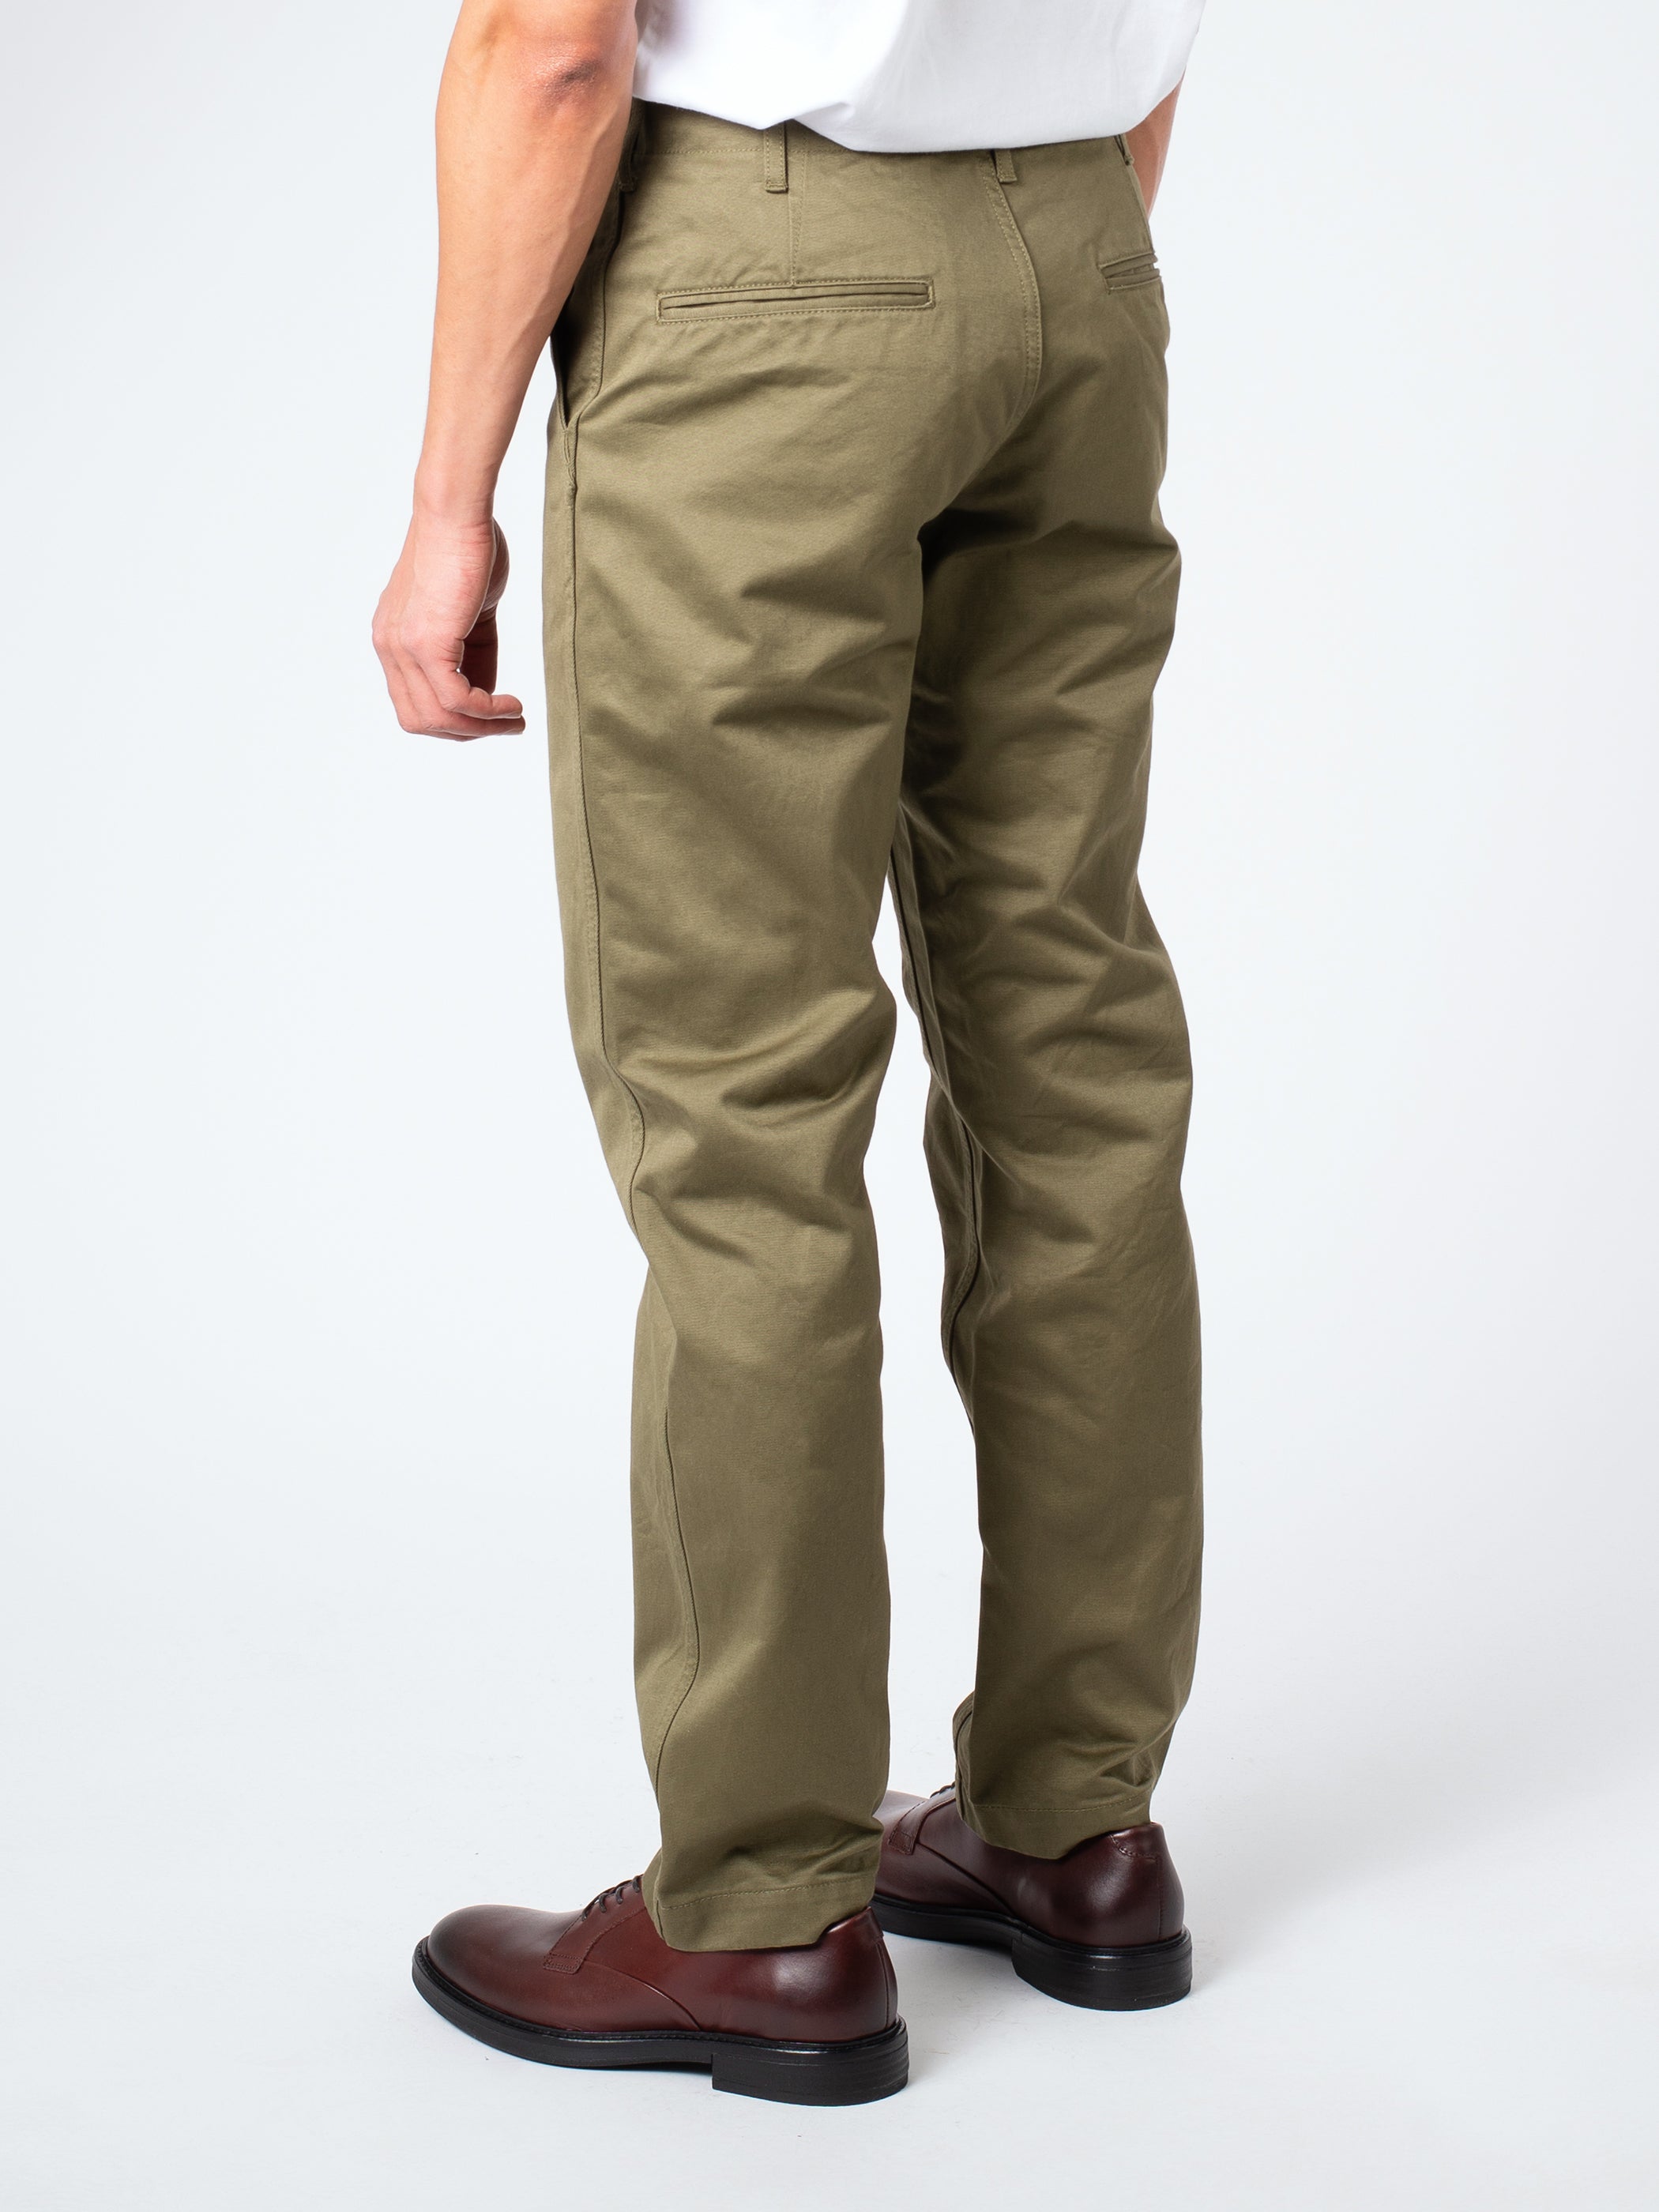 F.O.B. FACTORY - Narrow US Trousers in Olive – gravitypope